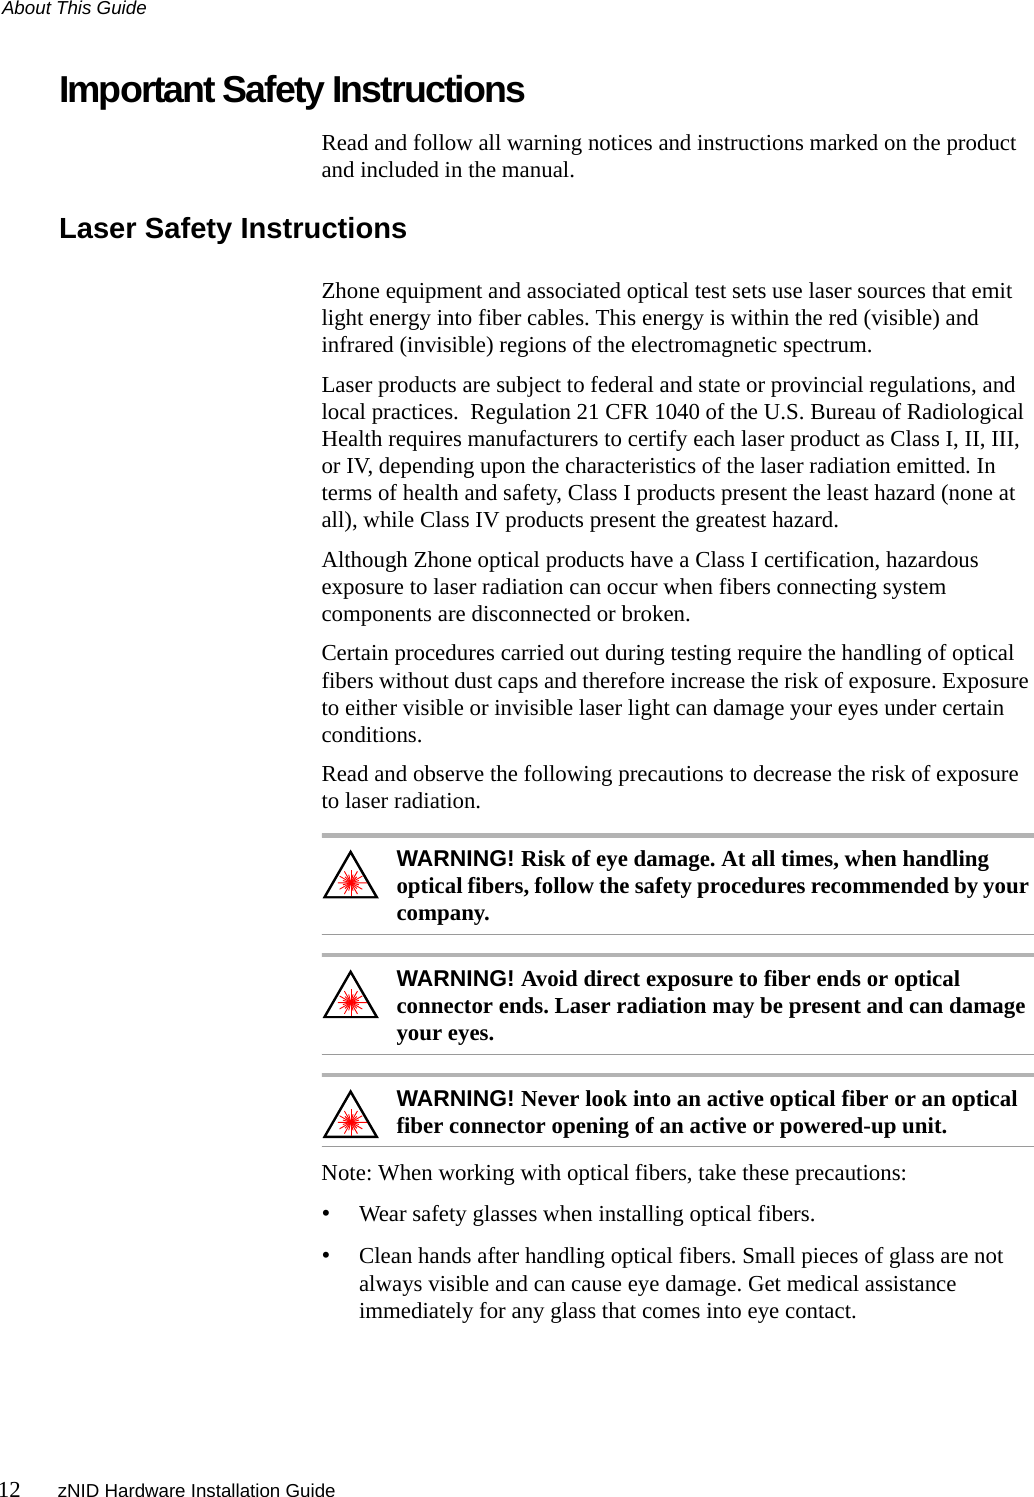 About This Guide12 zNID Hardware Installation GuideImportant Safety InstructionsRead and follow all warning notices and instructions marked on the product and included in the manual.Laser Safety InstructionsZhone equipment and associated optical test sets use laser sources that emit light energy into fiber cables. This energy is within the red (visible) and infrared (invisible) regions of the electromagnetic spectrum.Laser products are subject to federal and state or provincial regulations, and local practices.  Regulation 21 CFR 1040 of the U.S. Bureau of Radiological Health requires manufacturers to certify each laser product as Class I, II, III, or IV, depending upon the characteristics of the laser radiation emitted. In terms of health and safety, Class I products present the least hazard (none at all), while Class IV products present the greatest hazard.Although Zhone optical products have a Class I certification, hazardous exposure to laser radiation can occur when fibers connecting system components are disconnected or broken.Certain procedures carried out during testing require the handling of optical fibers without dust caps and therefore increase the risk of exposure. Exposure to either visible or invisible laser light can damage your eyes under certain conditions.Read and observe the following precautions to decrease the risk of exposure to laser radiation.WARNING! Risk of eye damage. At all times, when handling optical fibers, follow the safety procedures recommended by your company.WARNING! Avoid direct exposure to fiber ends or optical connector ends. Laser radiation may be present and can damage your eyes.WARNING! Never look into an active optical fiber or an optical fiber connector opening of an active or powered-up unit.Note: When working with optical fibers, take these precautions:•Wear safety glasses when installing optical fibers.•Clean hands after handling optical fibers. Small pieces of glass are not always visible and can cause eye damage. Get medical assistance immediately for any glass that comes into eye contact.